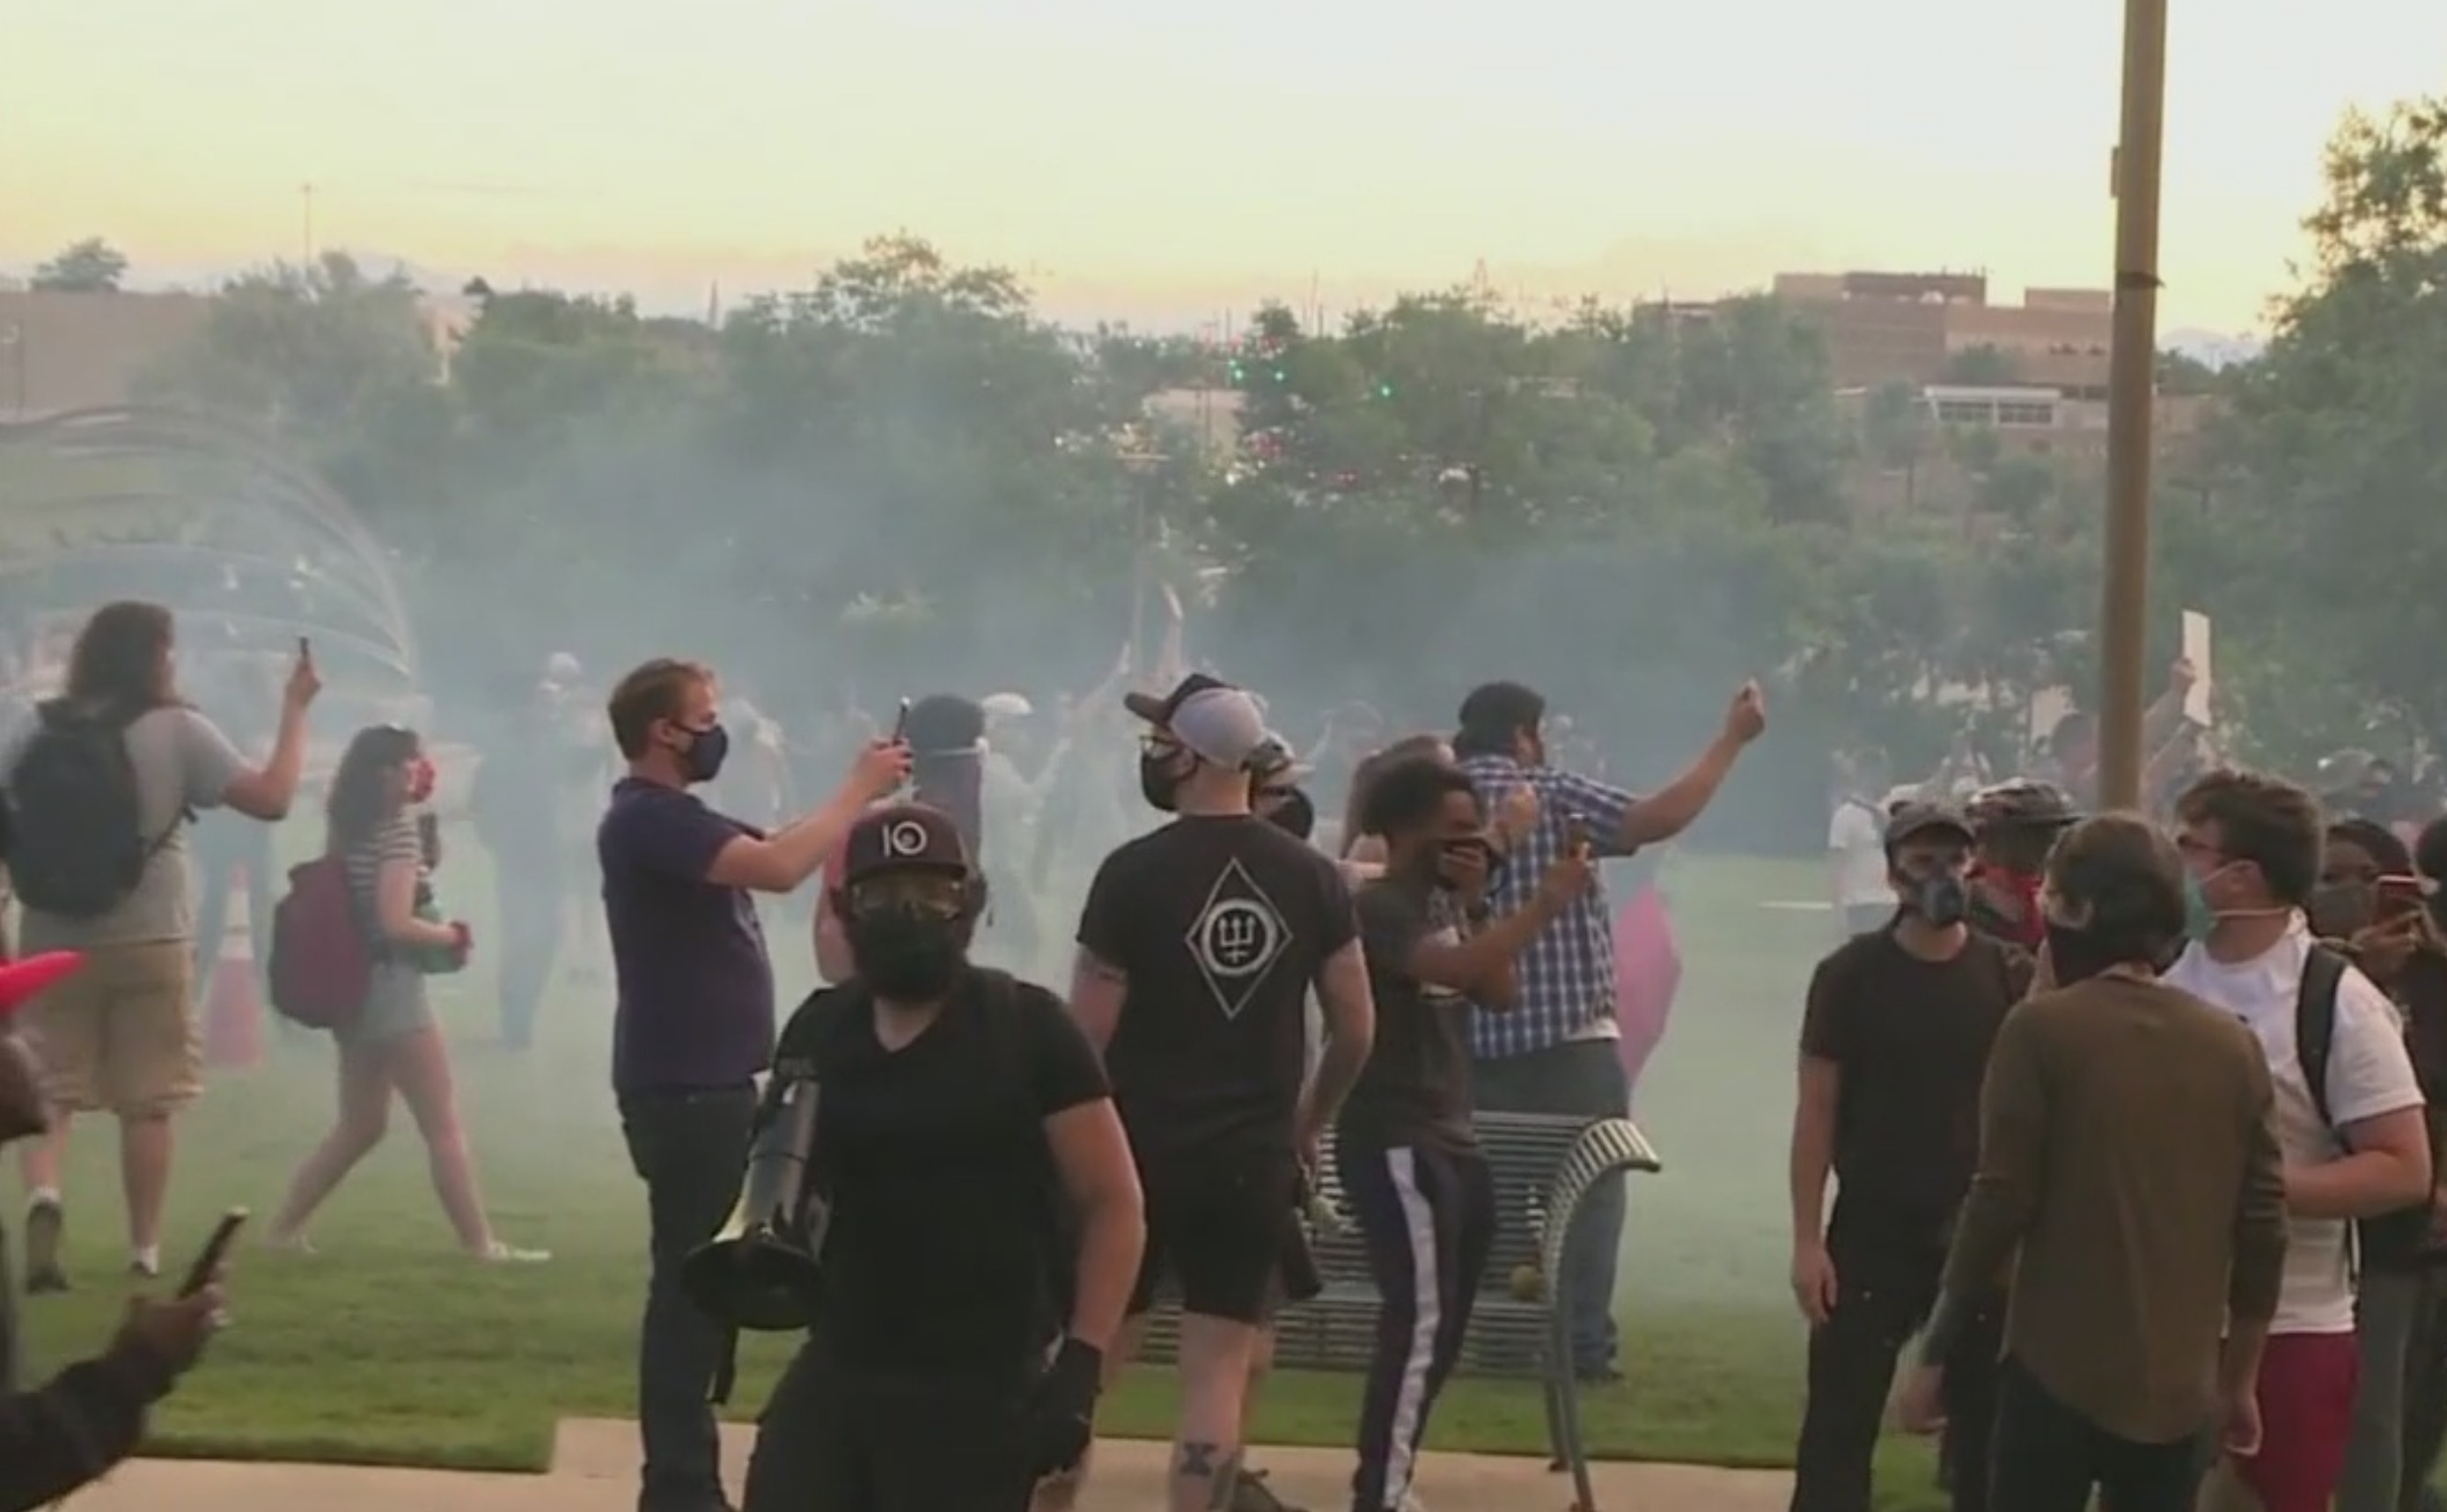 An image from a protest in June in Aurora in which police used tear gas during a protest.